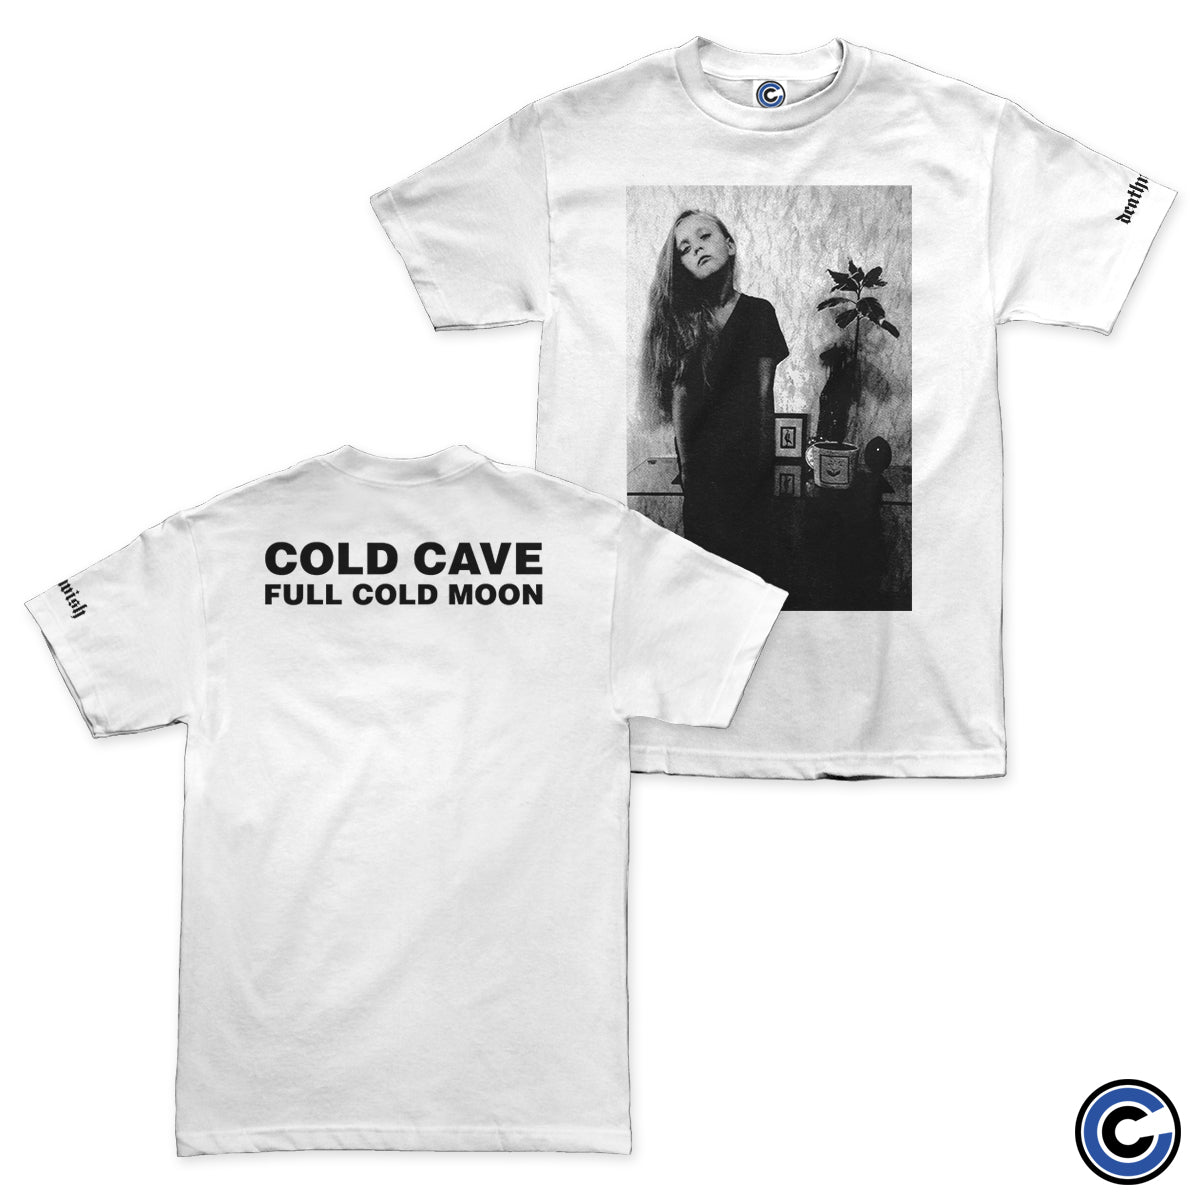 Cold Cave "Full Cold Moon" Shirt